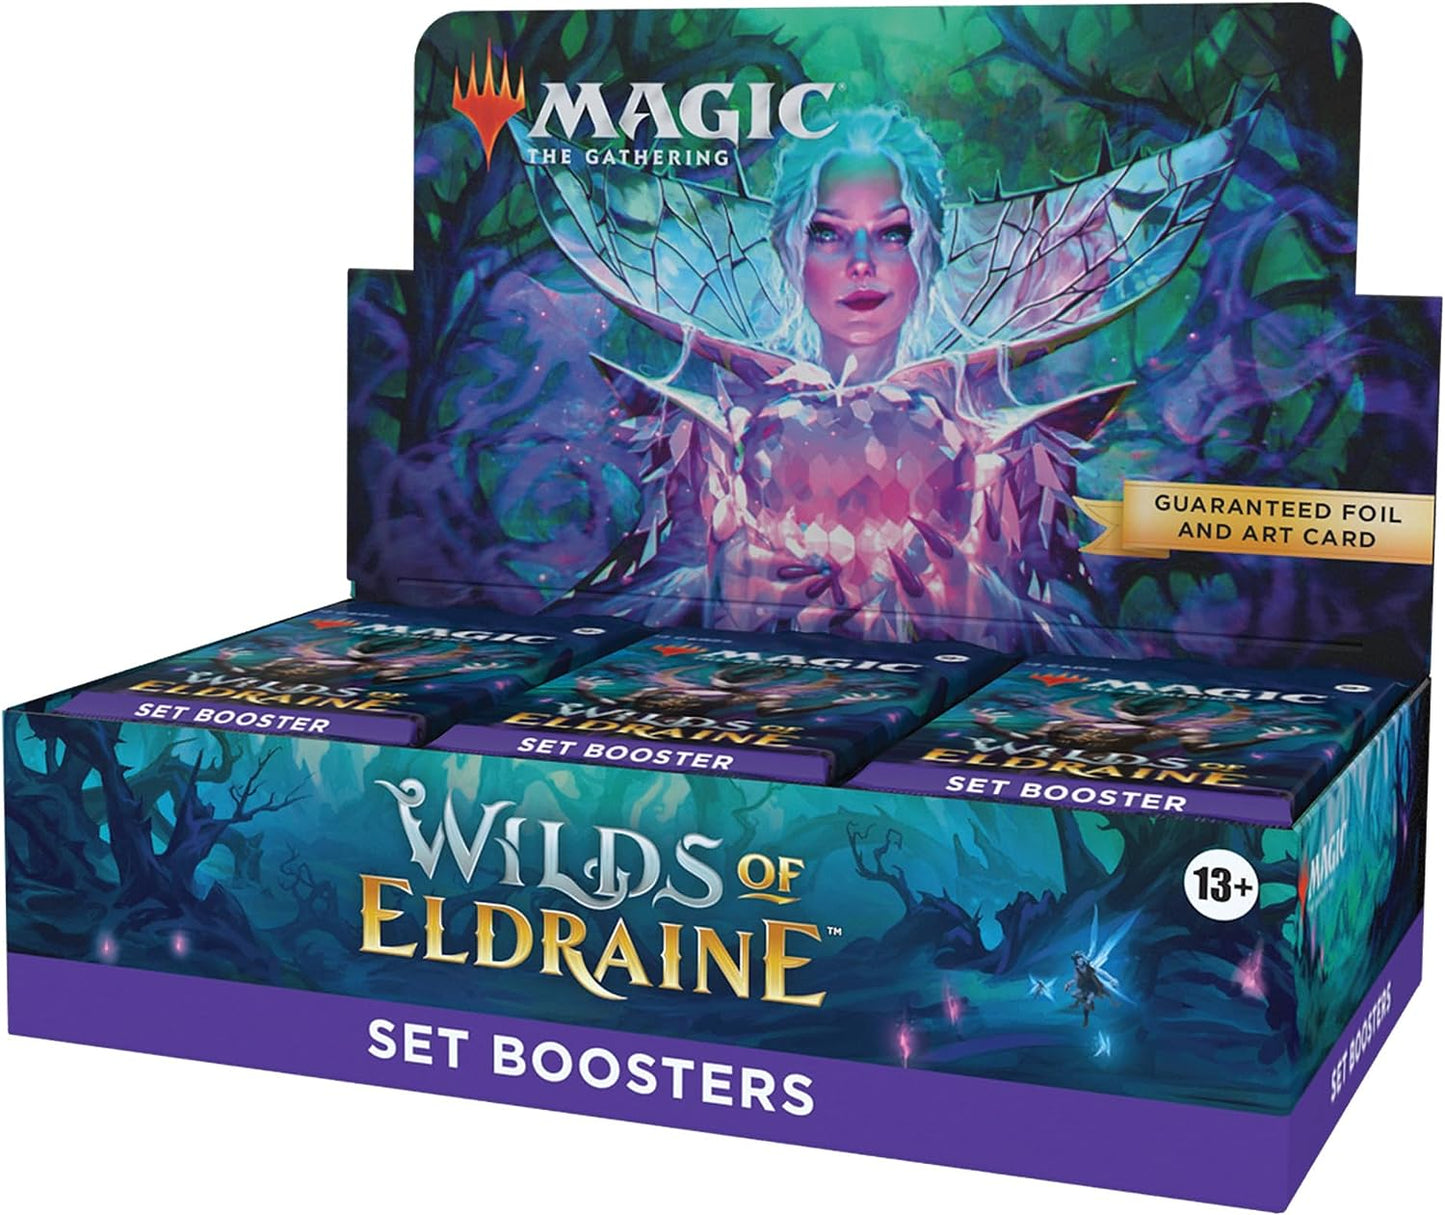 Magic: The Gathering - Wilds of Eldraine - Set Booster